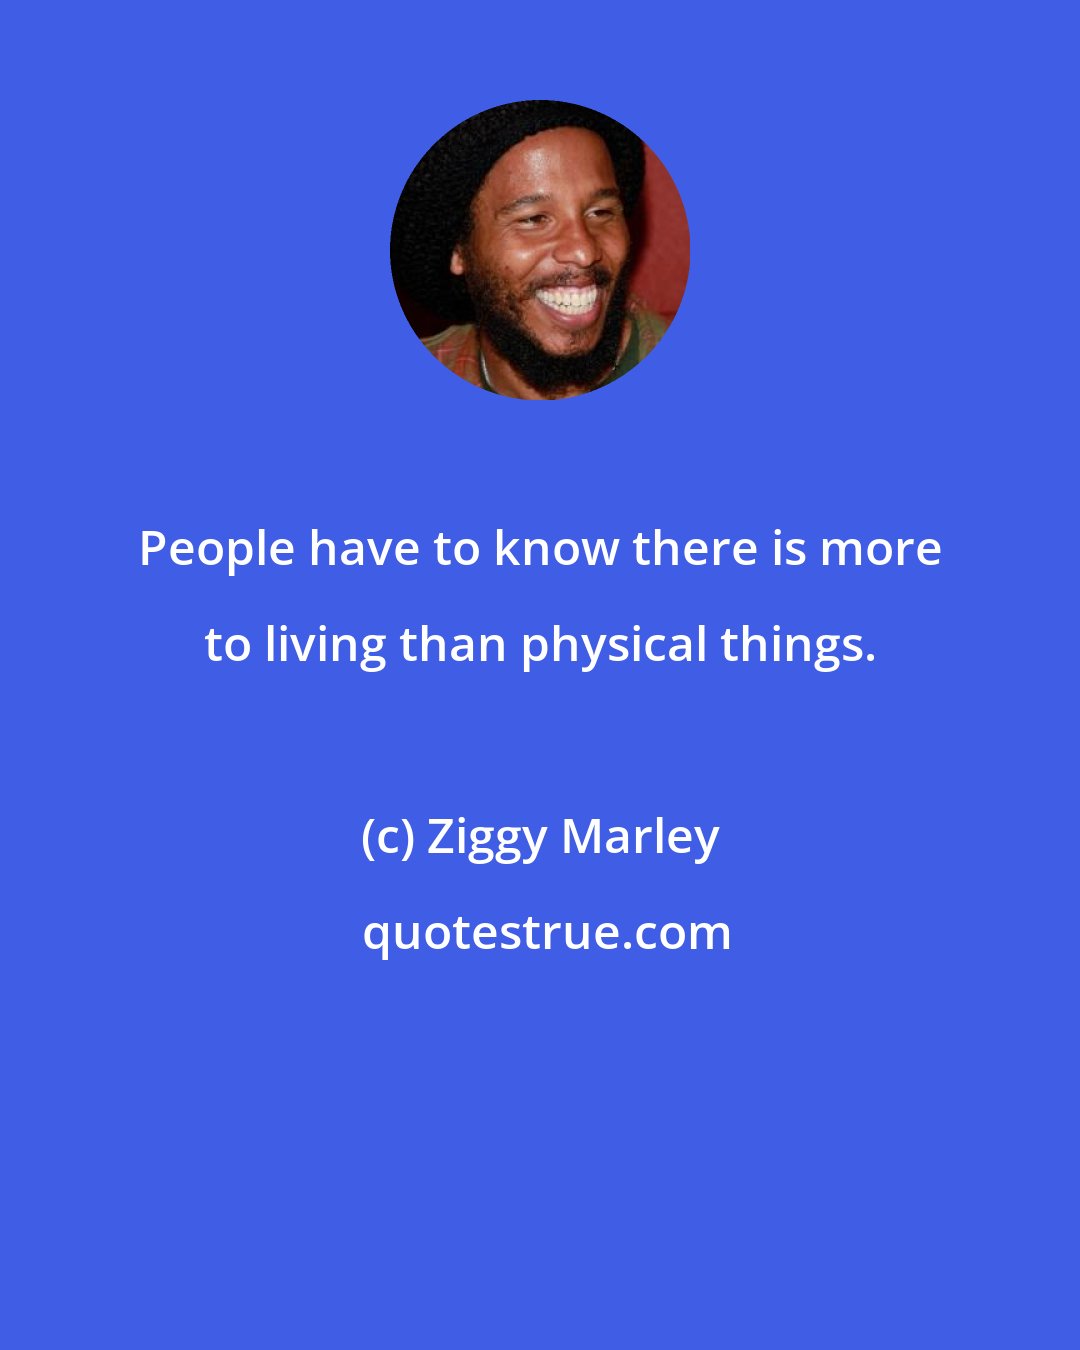 Ziggy Marley: People have to know there is more to living than physical things.